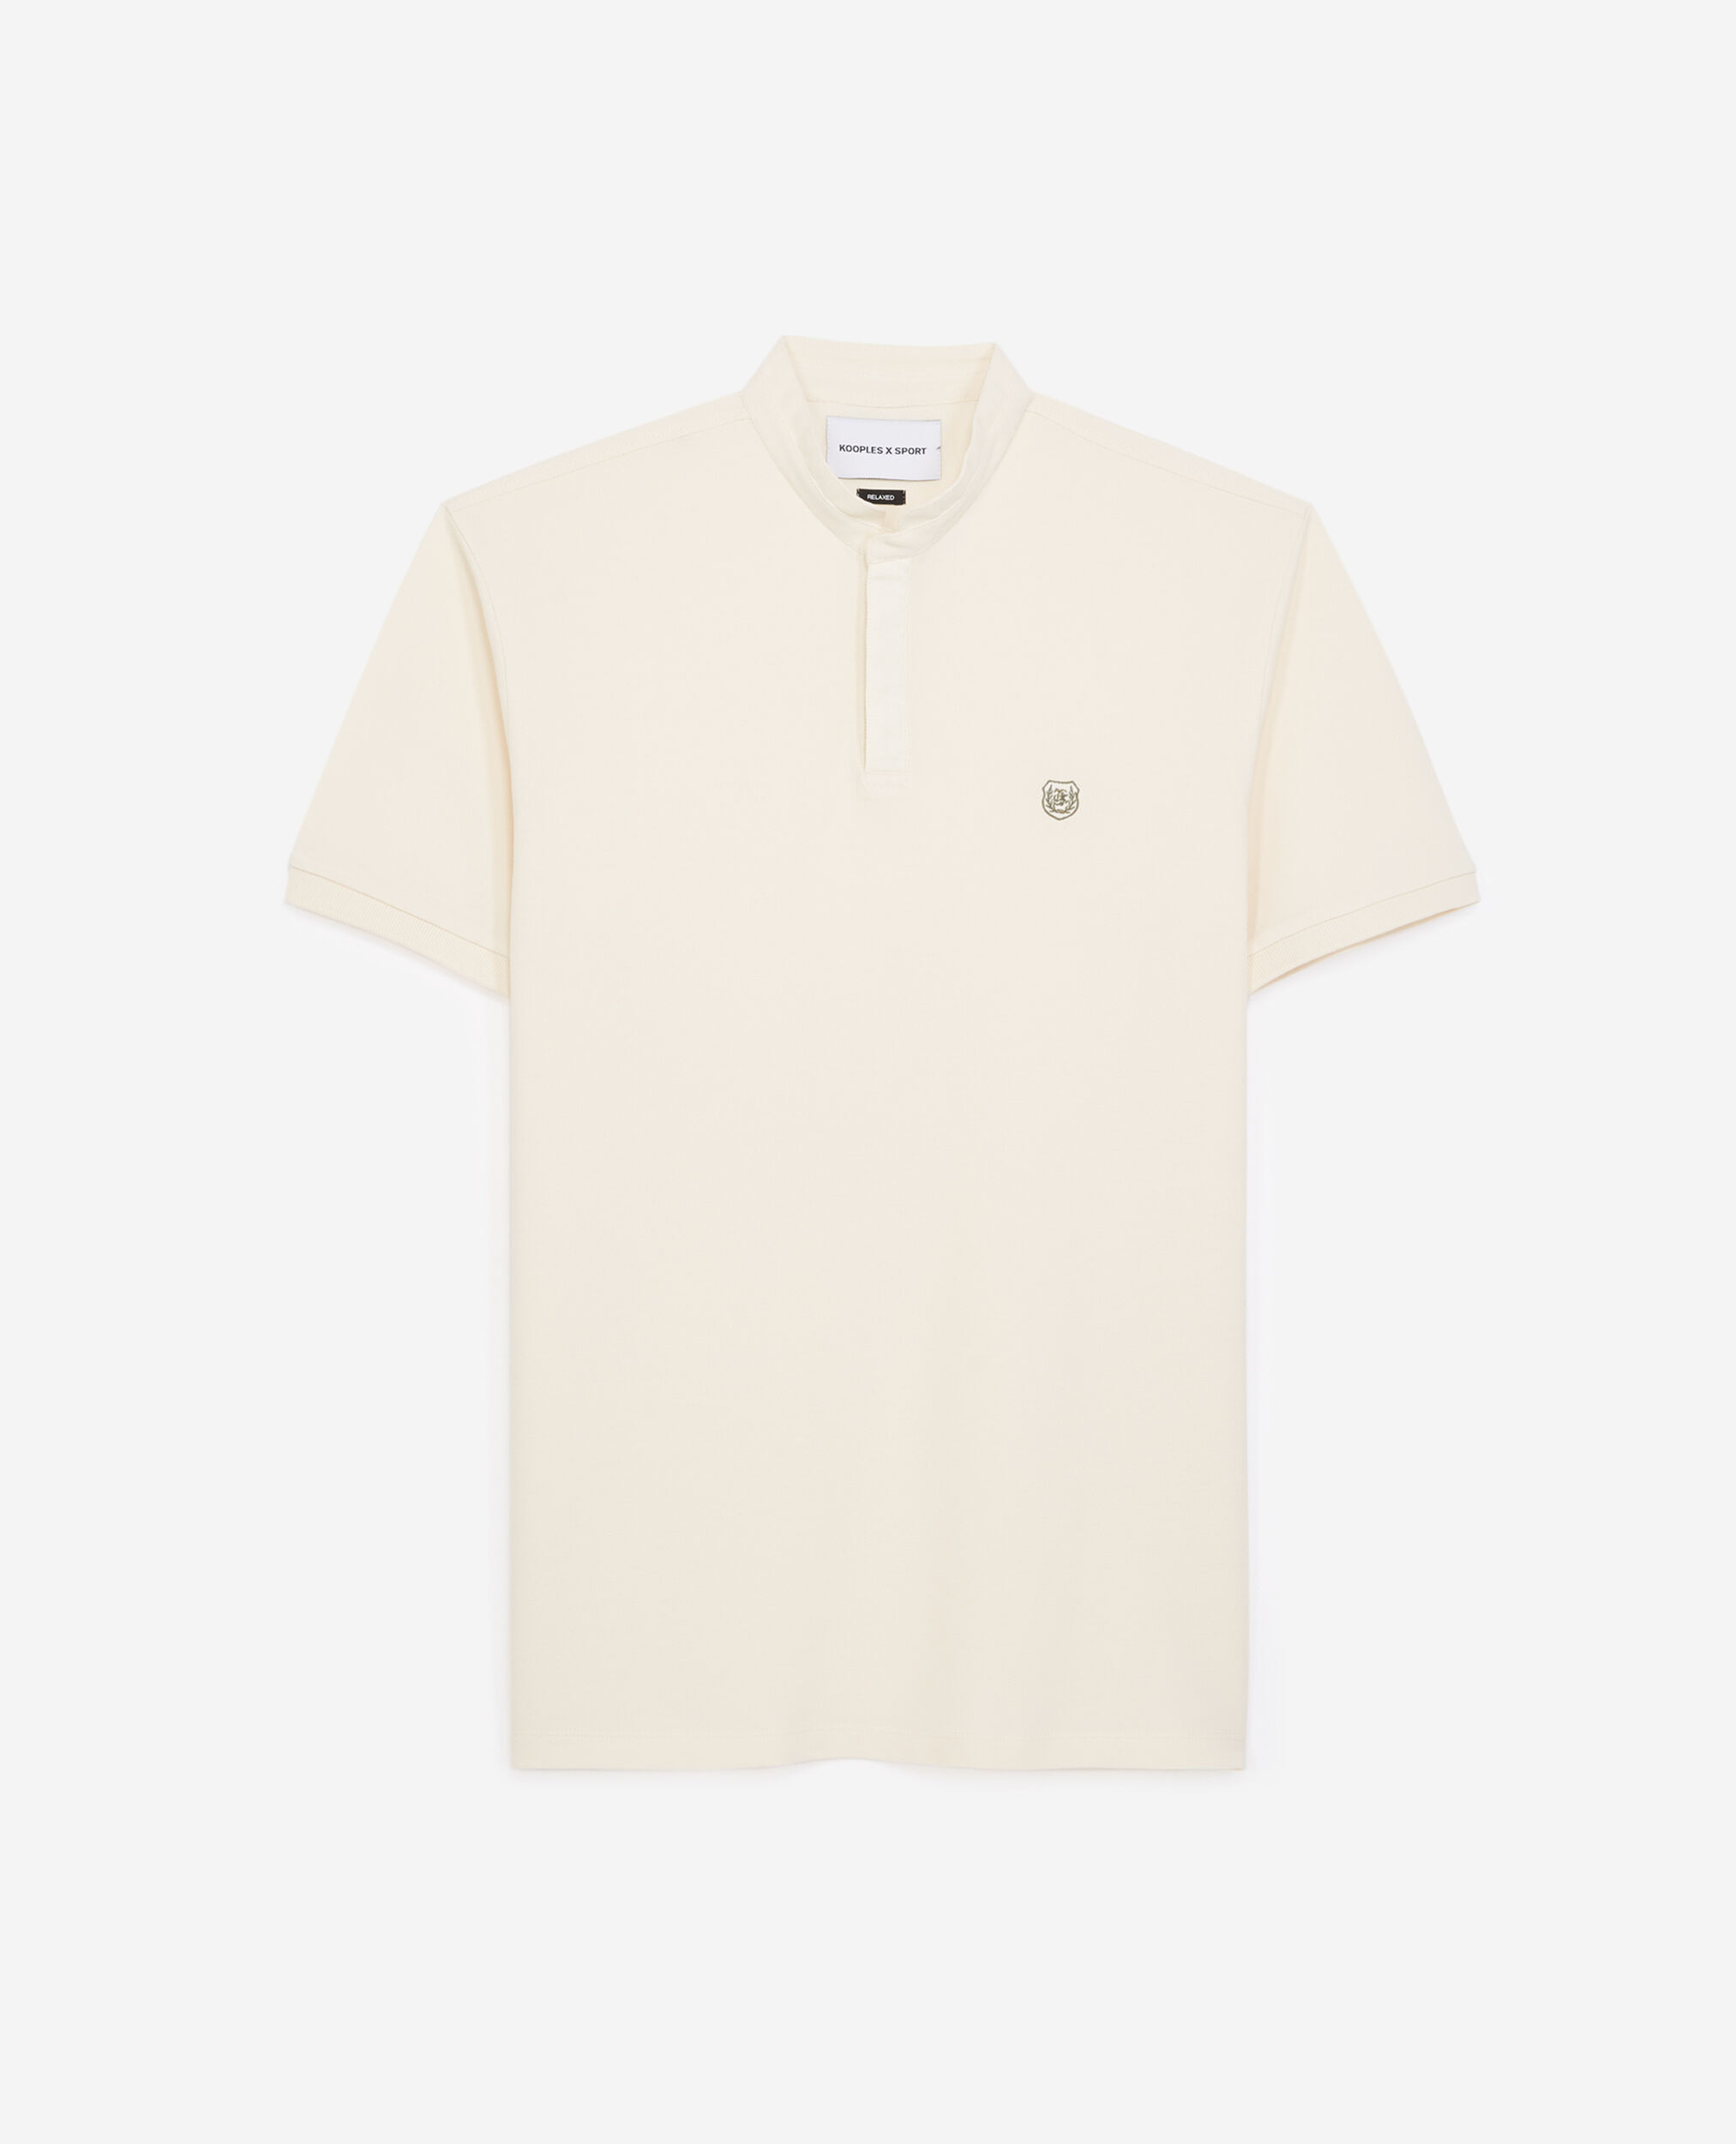 Weißes Baumwoll-Poloshirt mit grüner Paspel, ANTIQUE WHT / DUSTY OLIVE, hi-res image number null